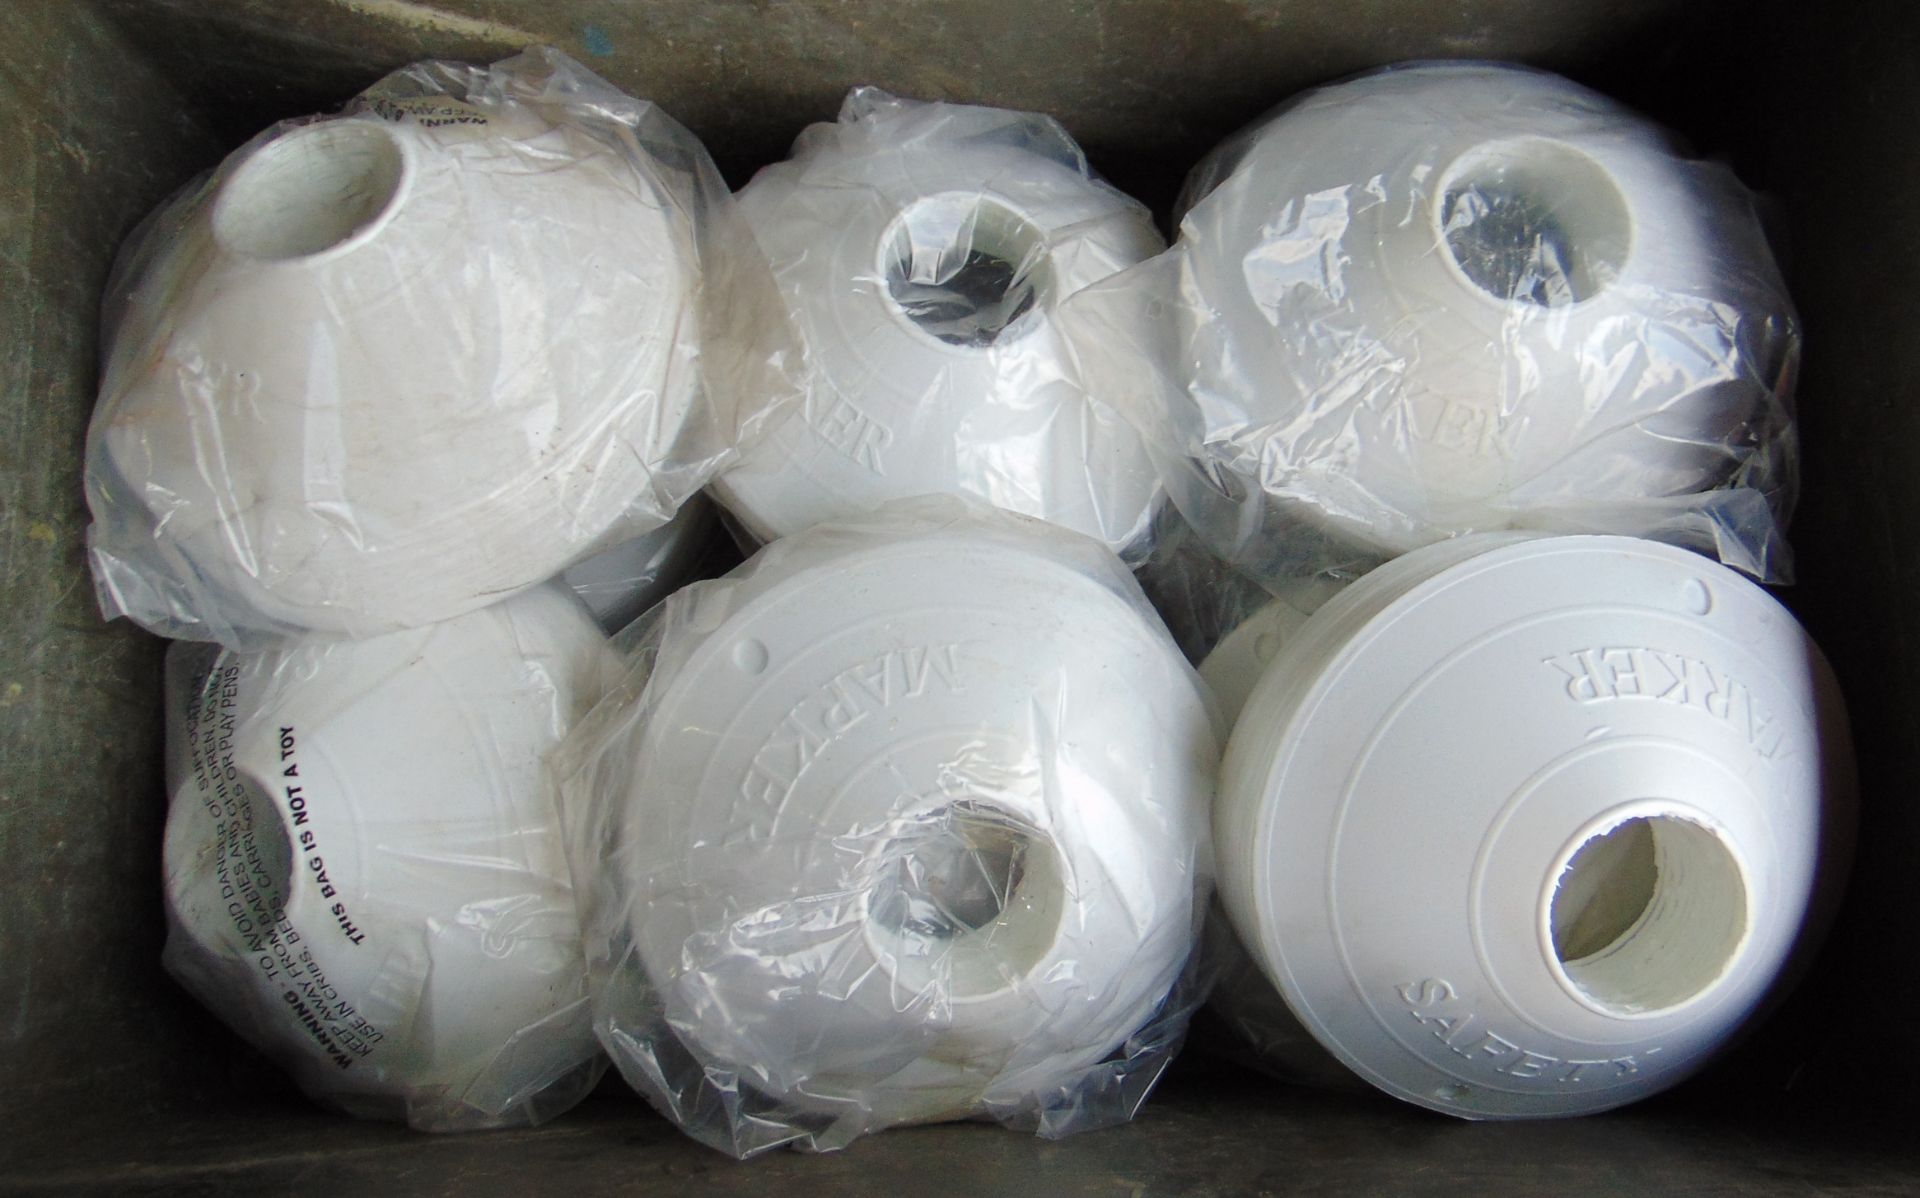 New Unissued Approx. 200 White Plastic Safety Markers - Image 4 of 4